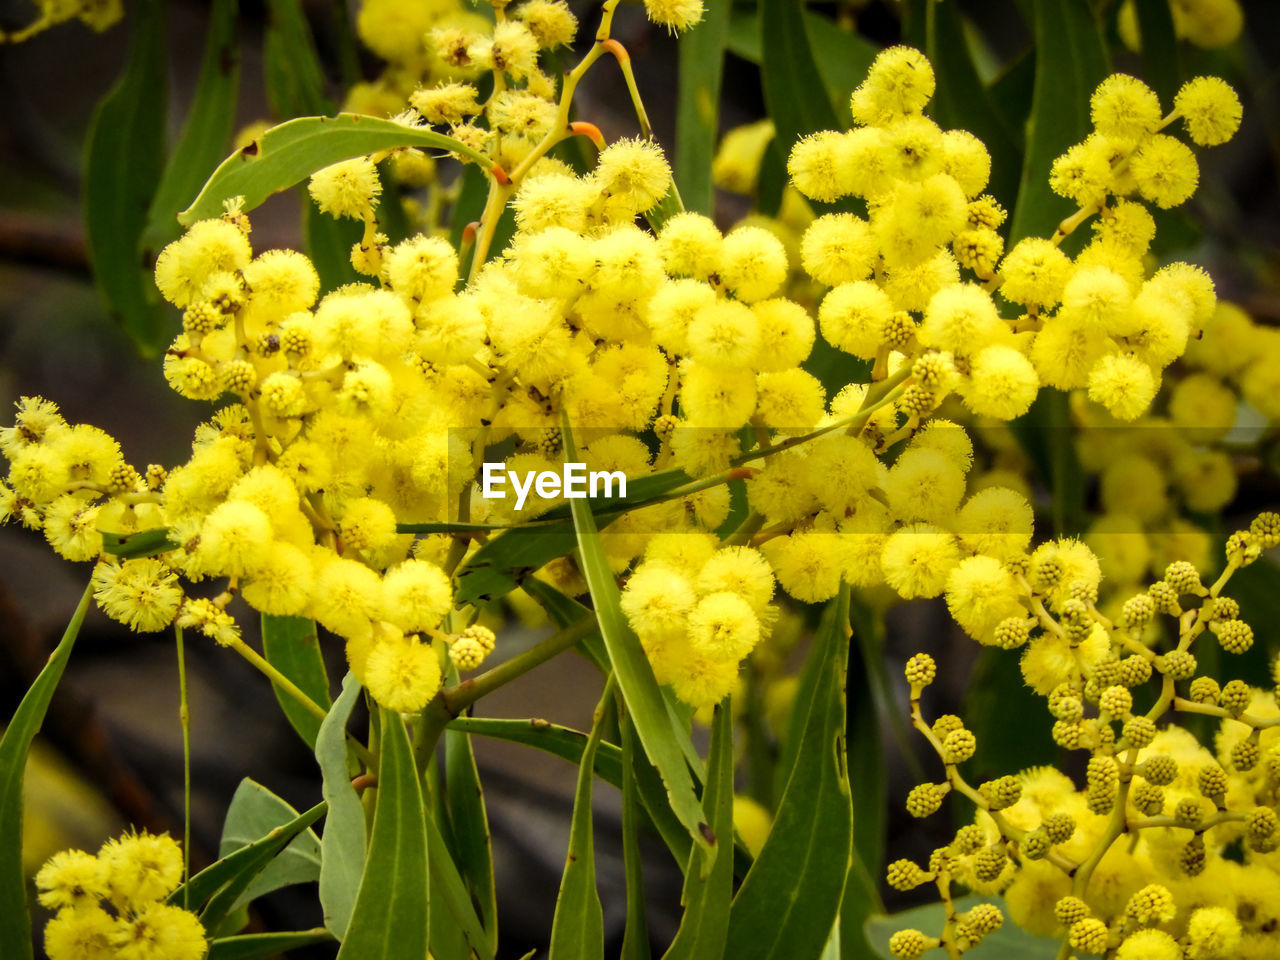 CLOSE-UP OF YELLOW FLOWERS ON PLANT